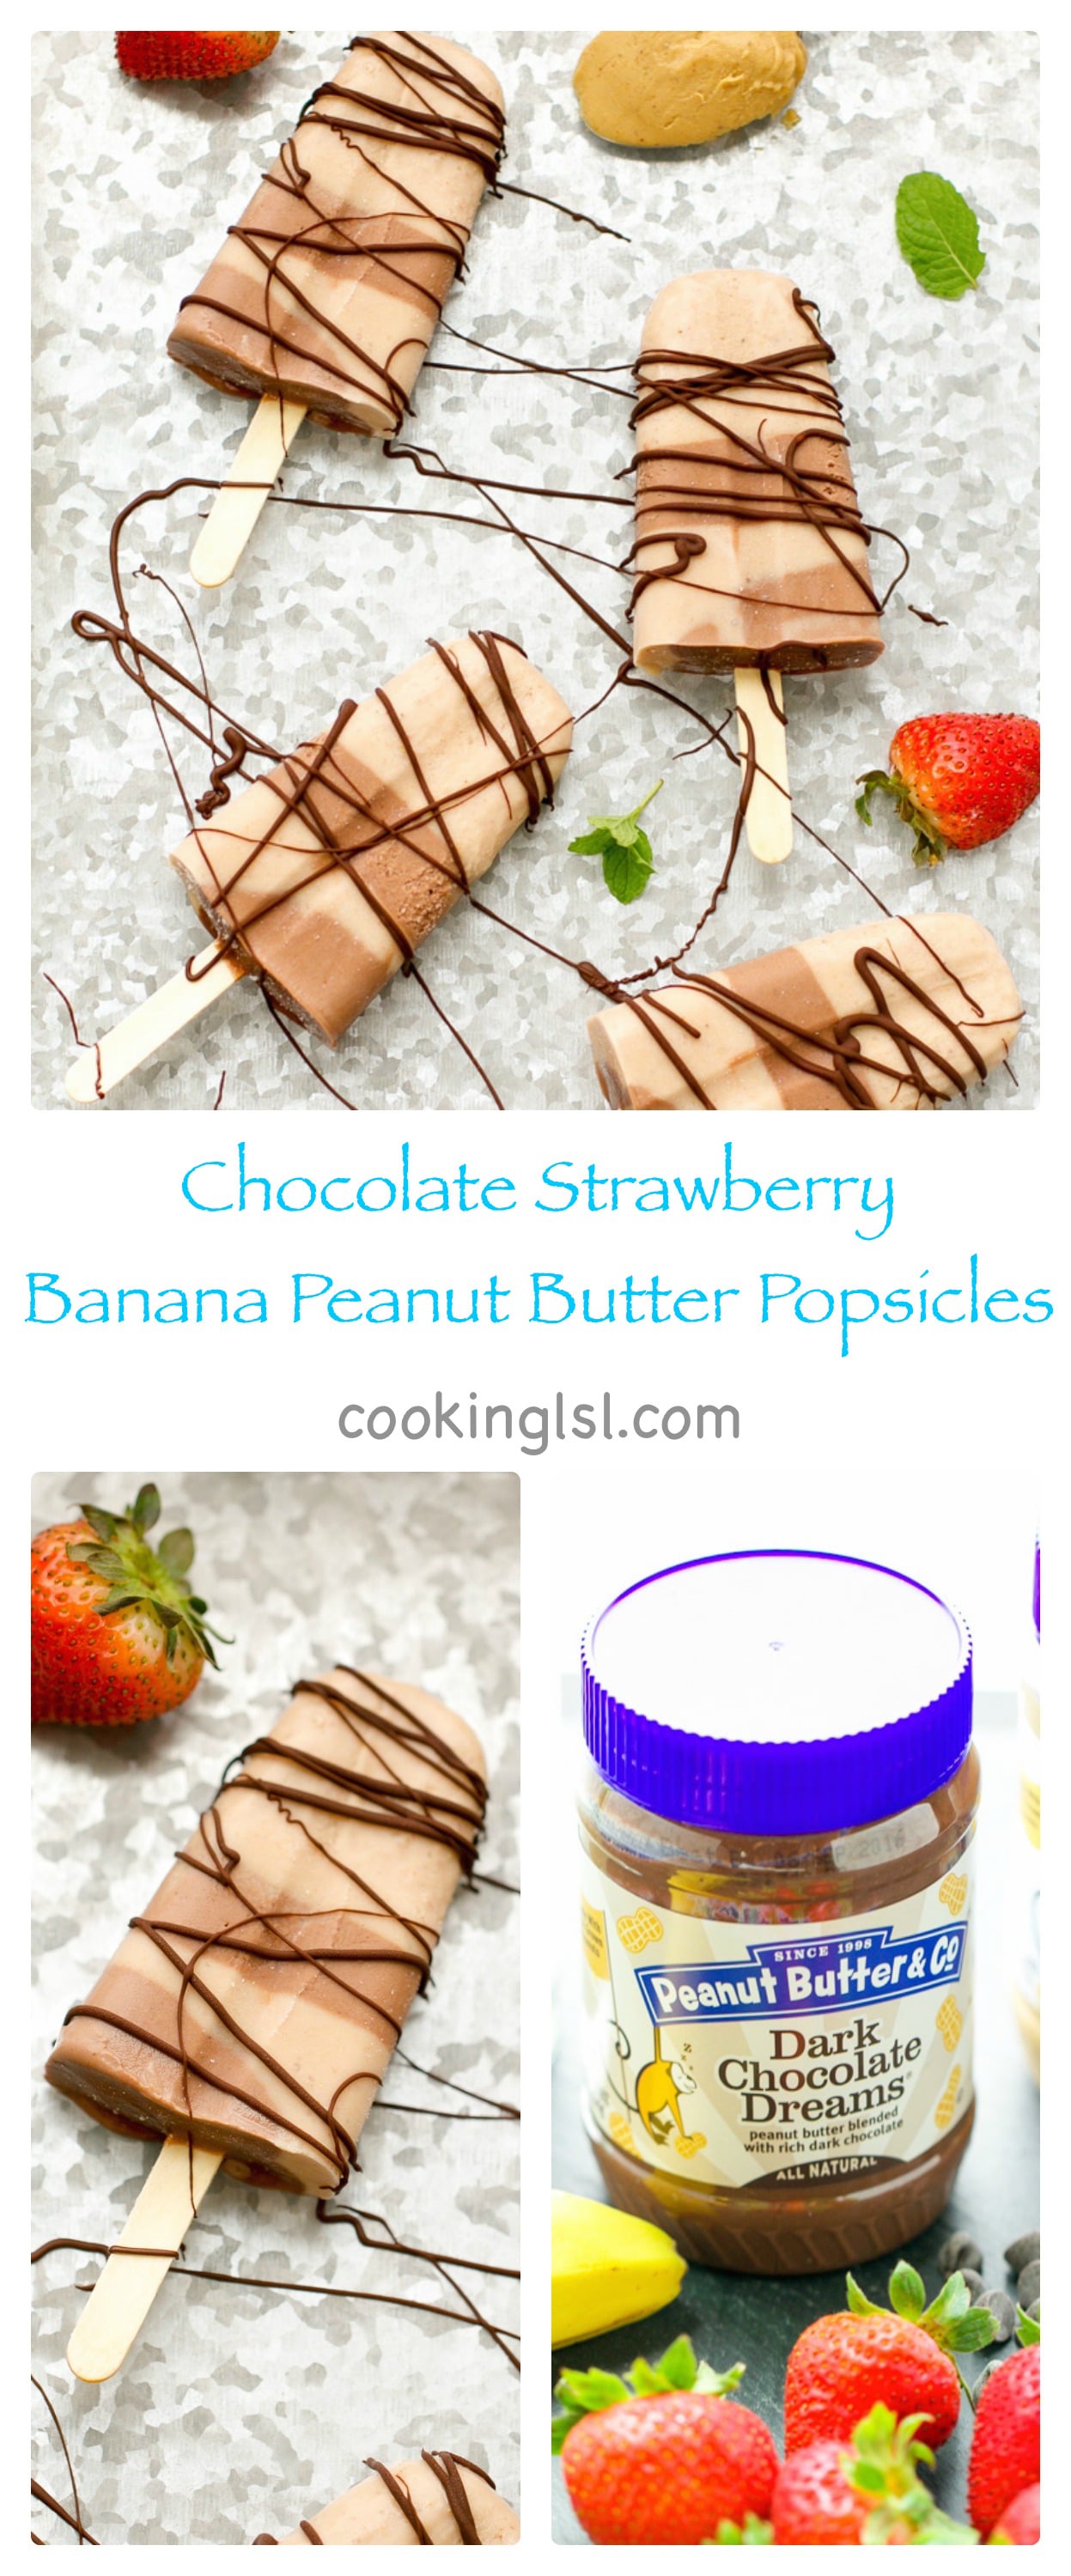 chocolate-strawberry-banana-peanut-butter-popsicles